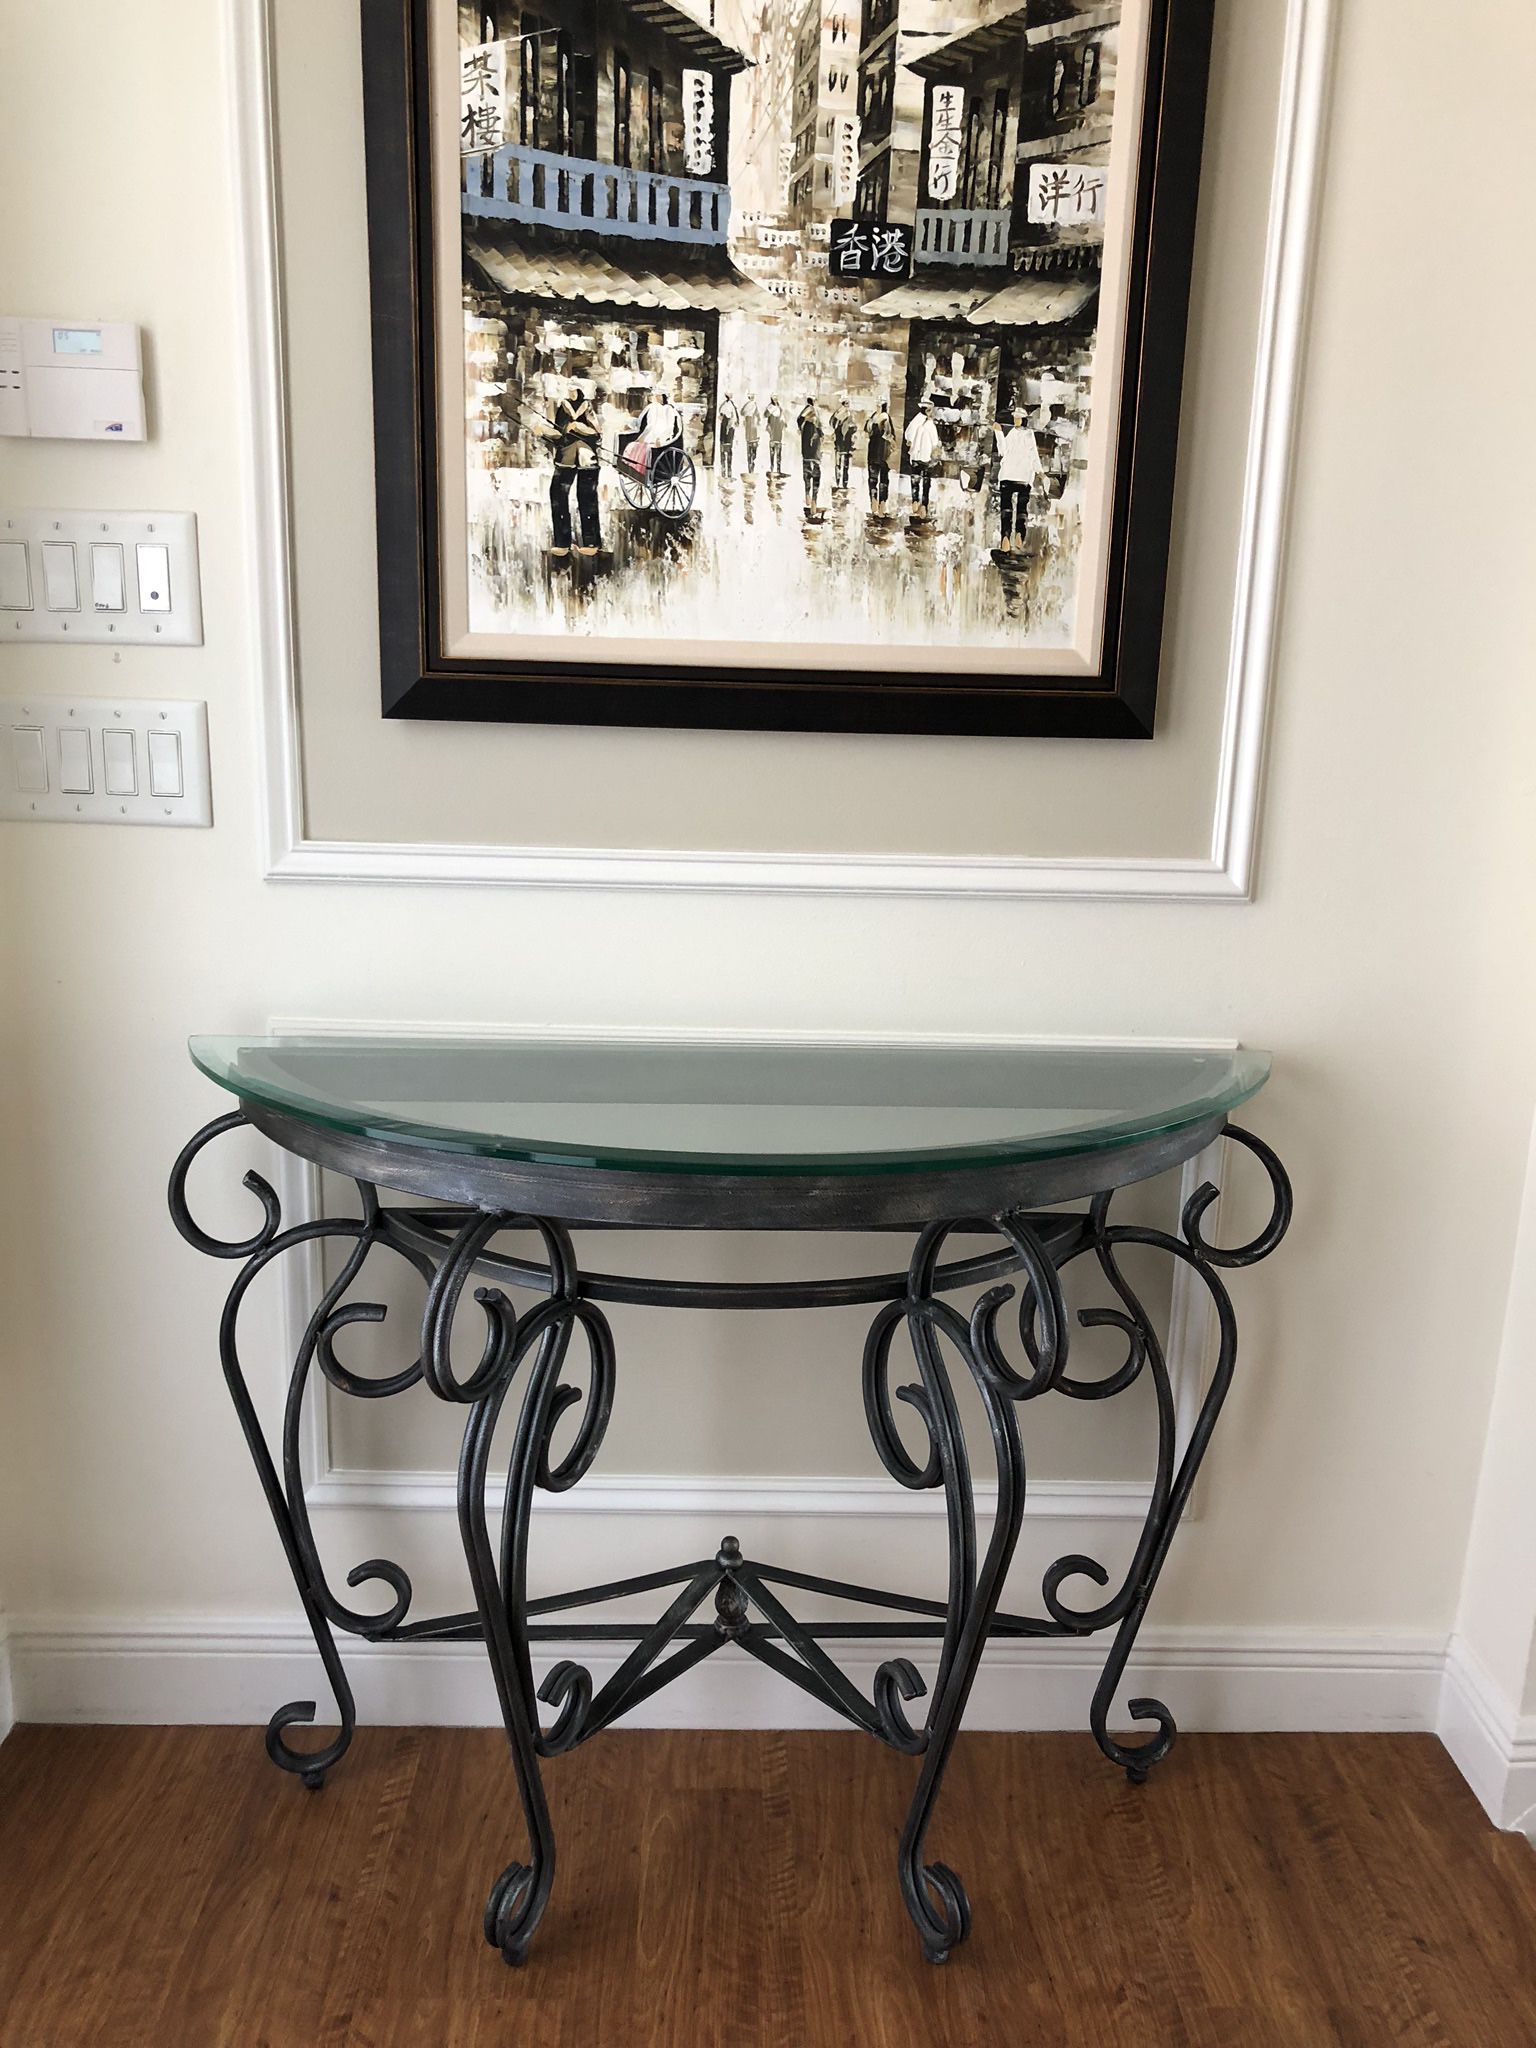 Glass & Iron Entry/Console  Table